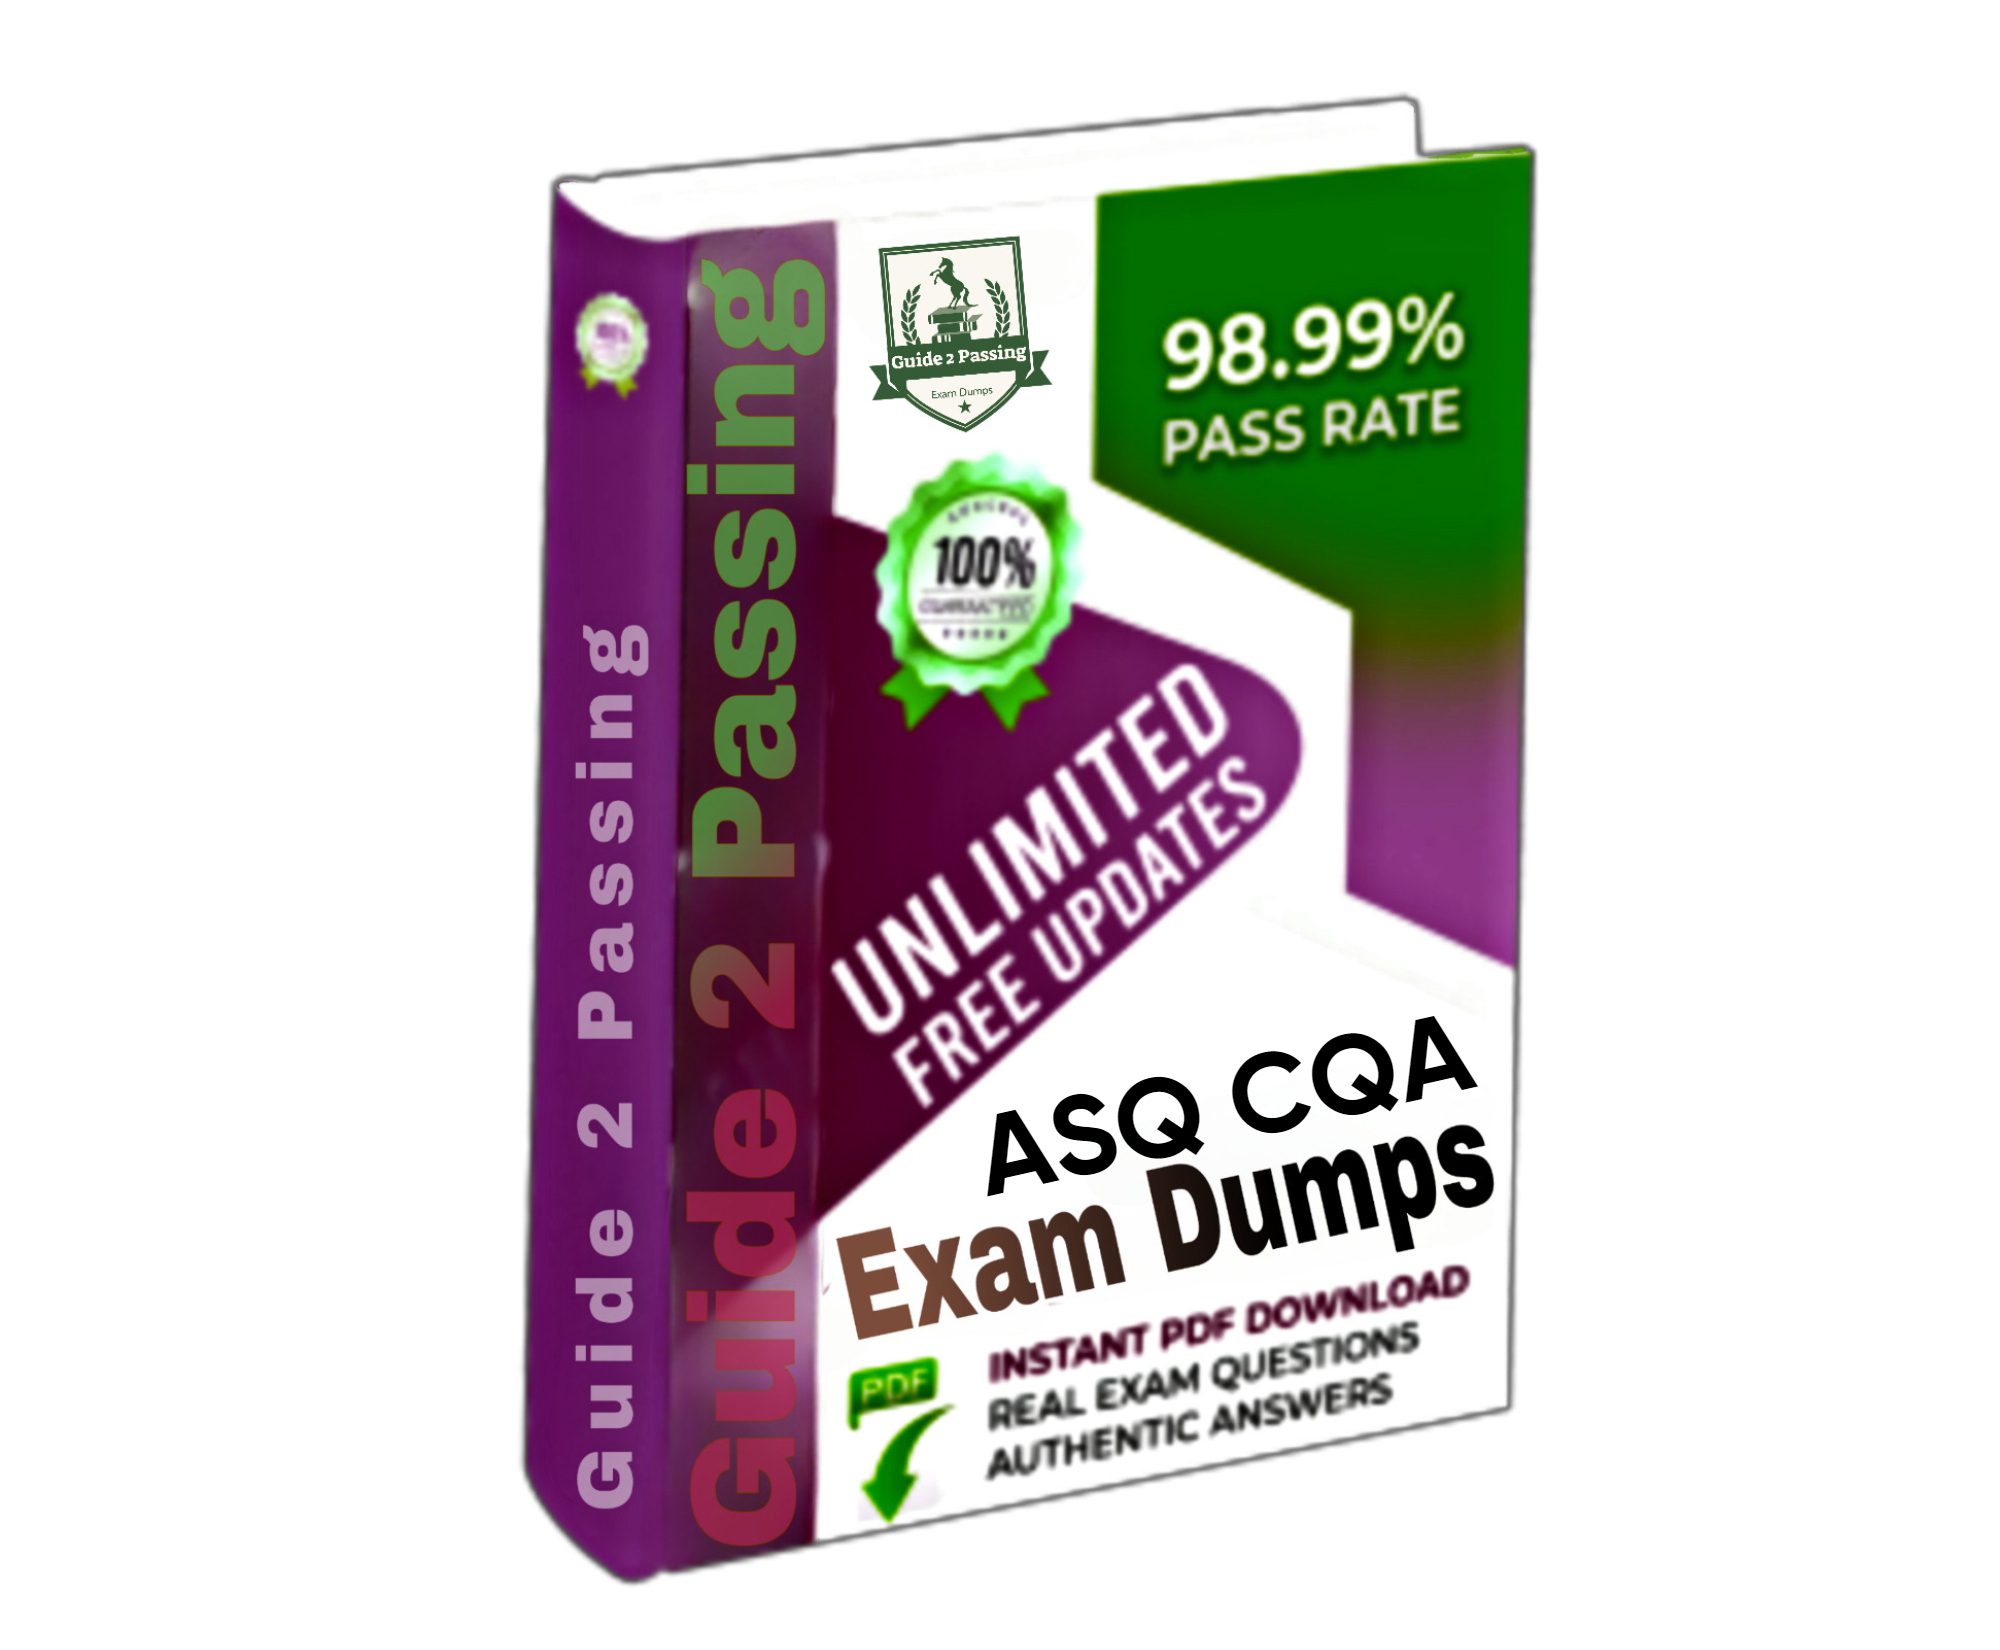 Pass Your ASQ CQA Exam Dumps From Guide 2 Passing